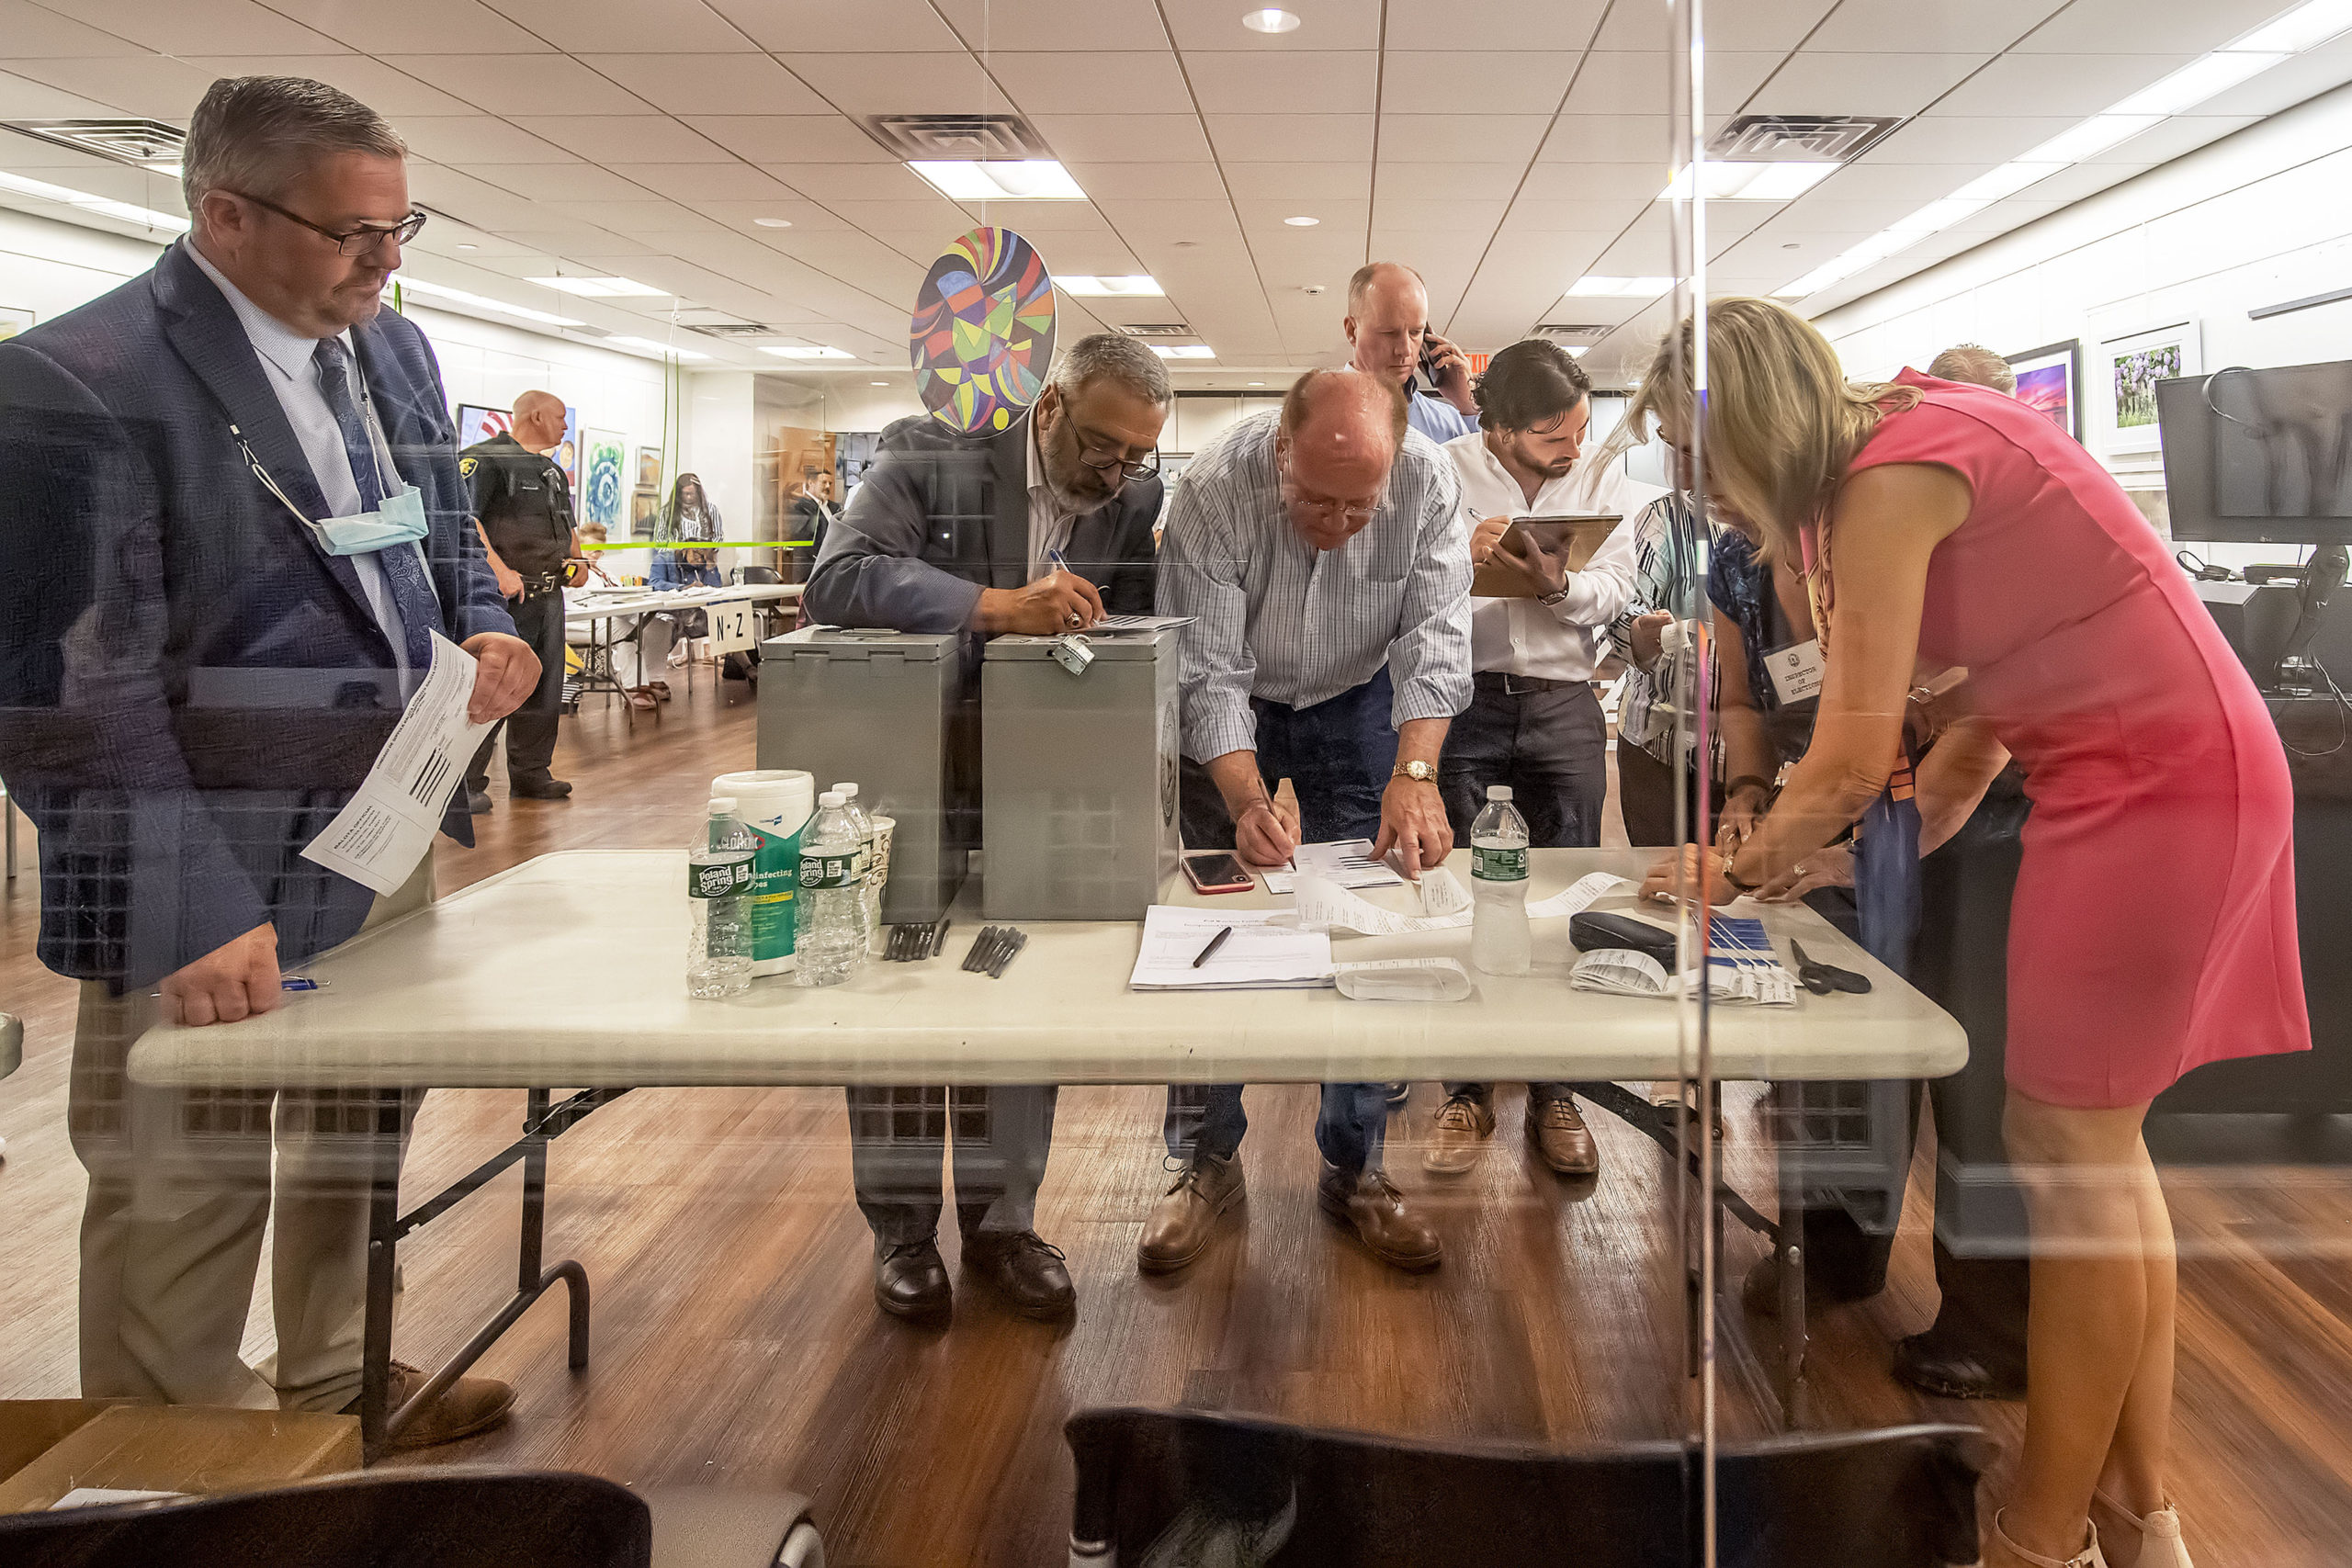 The vote count from each of the voting machines is tabulated during the 2021 Southampton Village Mayoral election at the Southampton Cultural Center on Friday night. MICHAEL HELLER